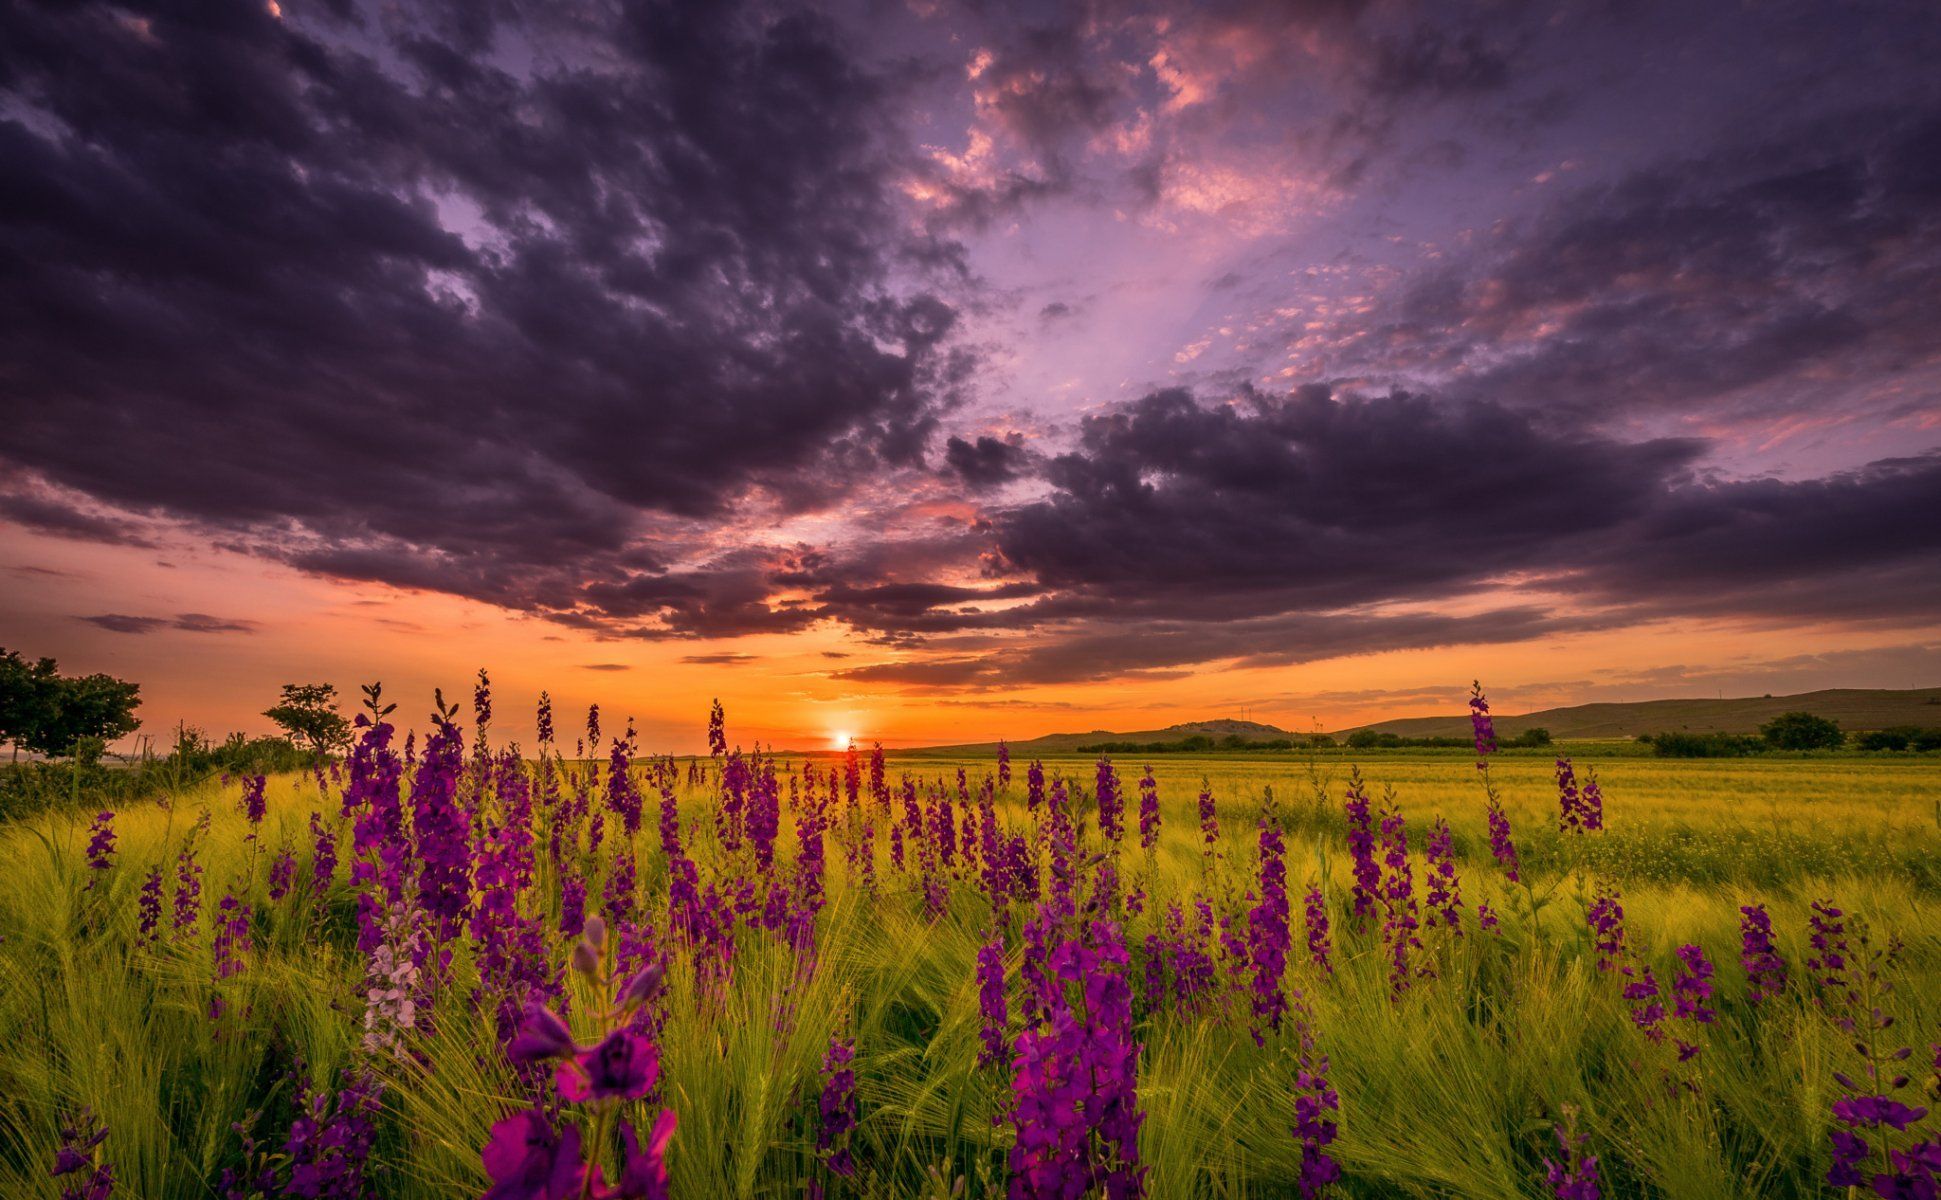 Gallery For Gt Summer Night Sky Wallpaper Flowers And Sunset HD Wallpaper